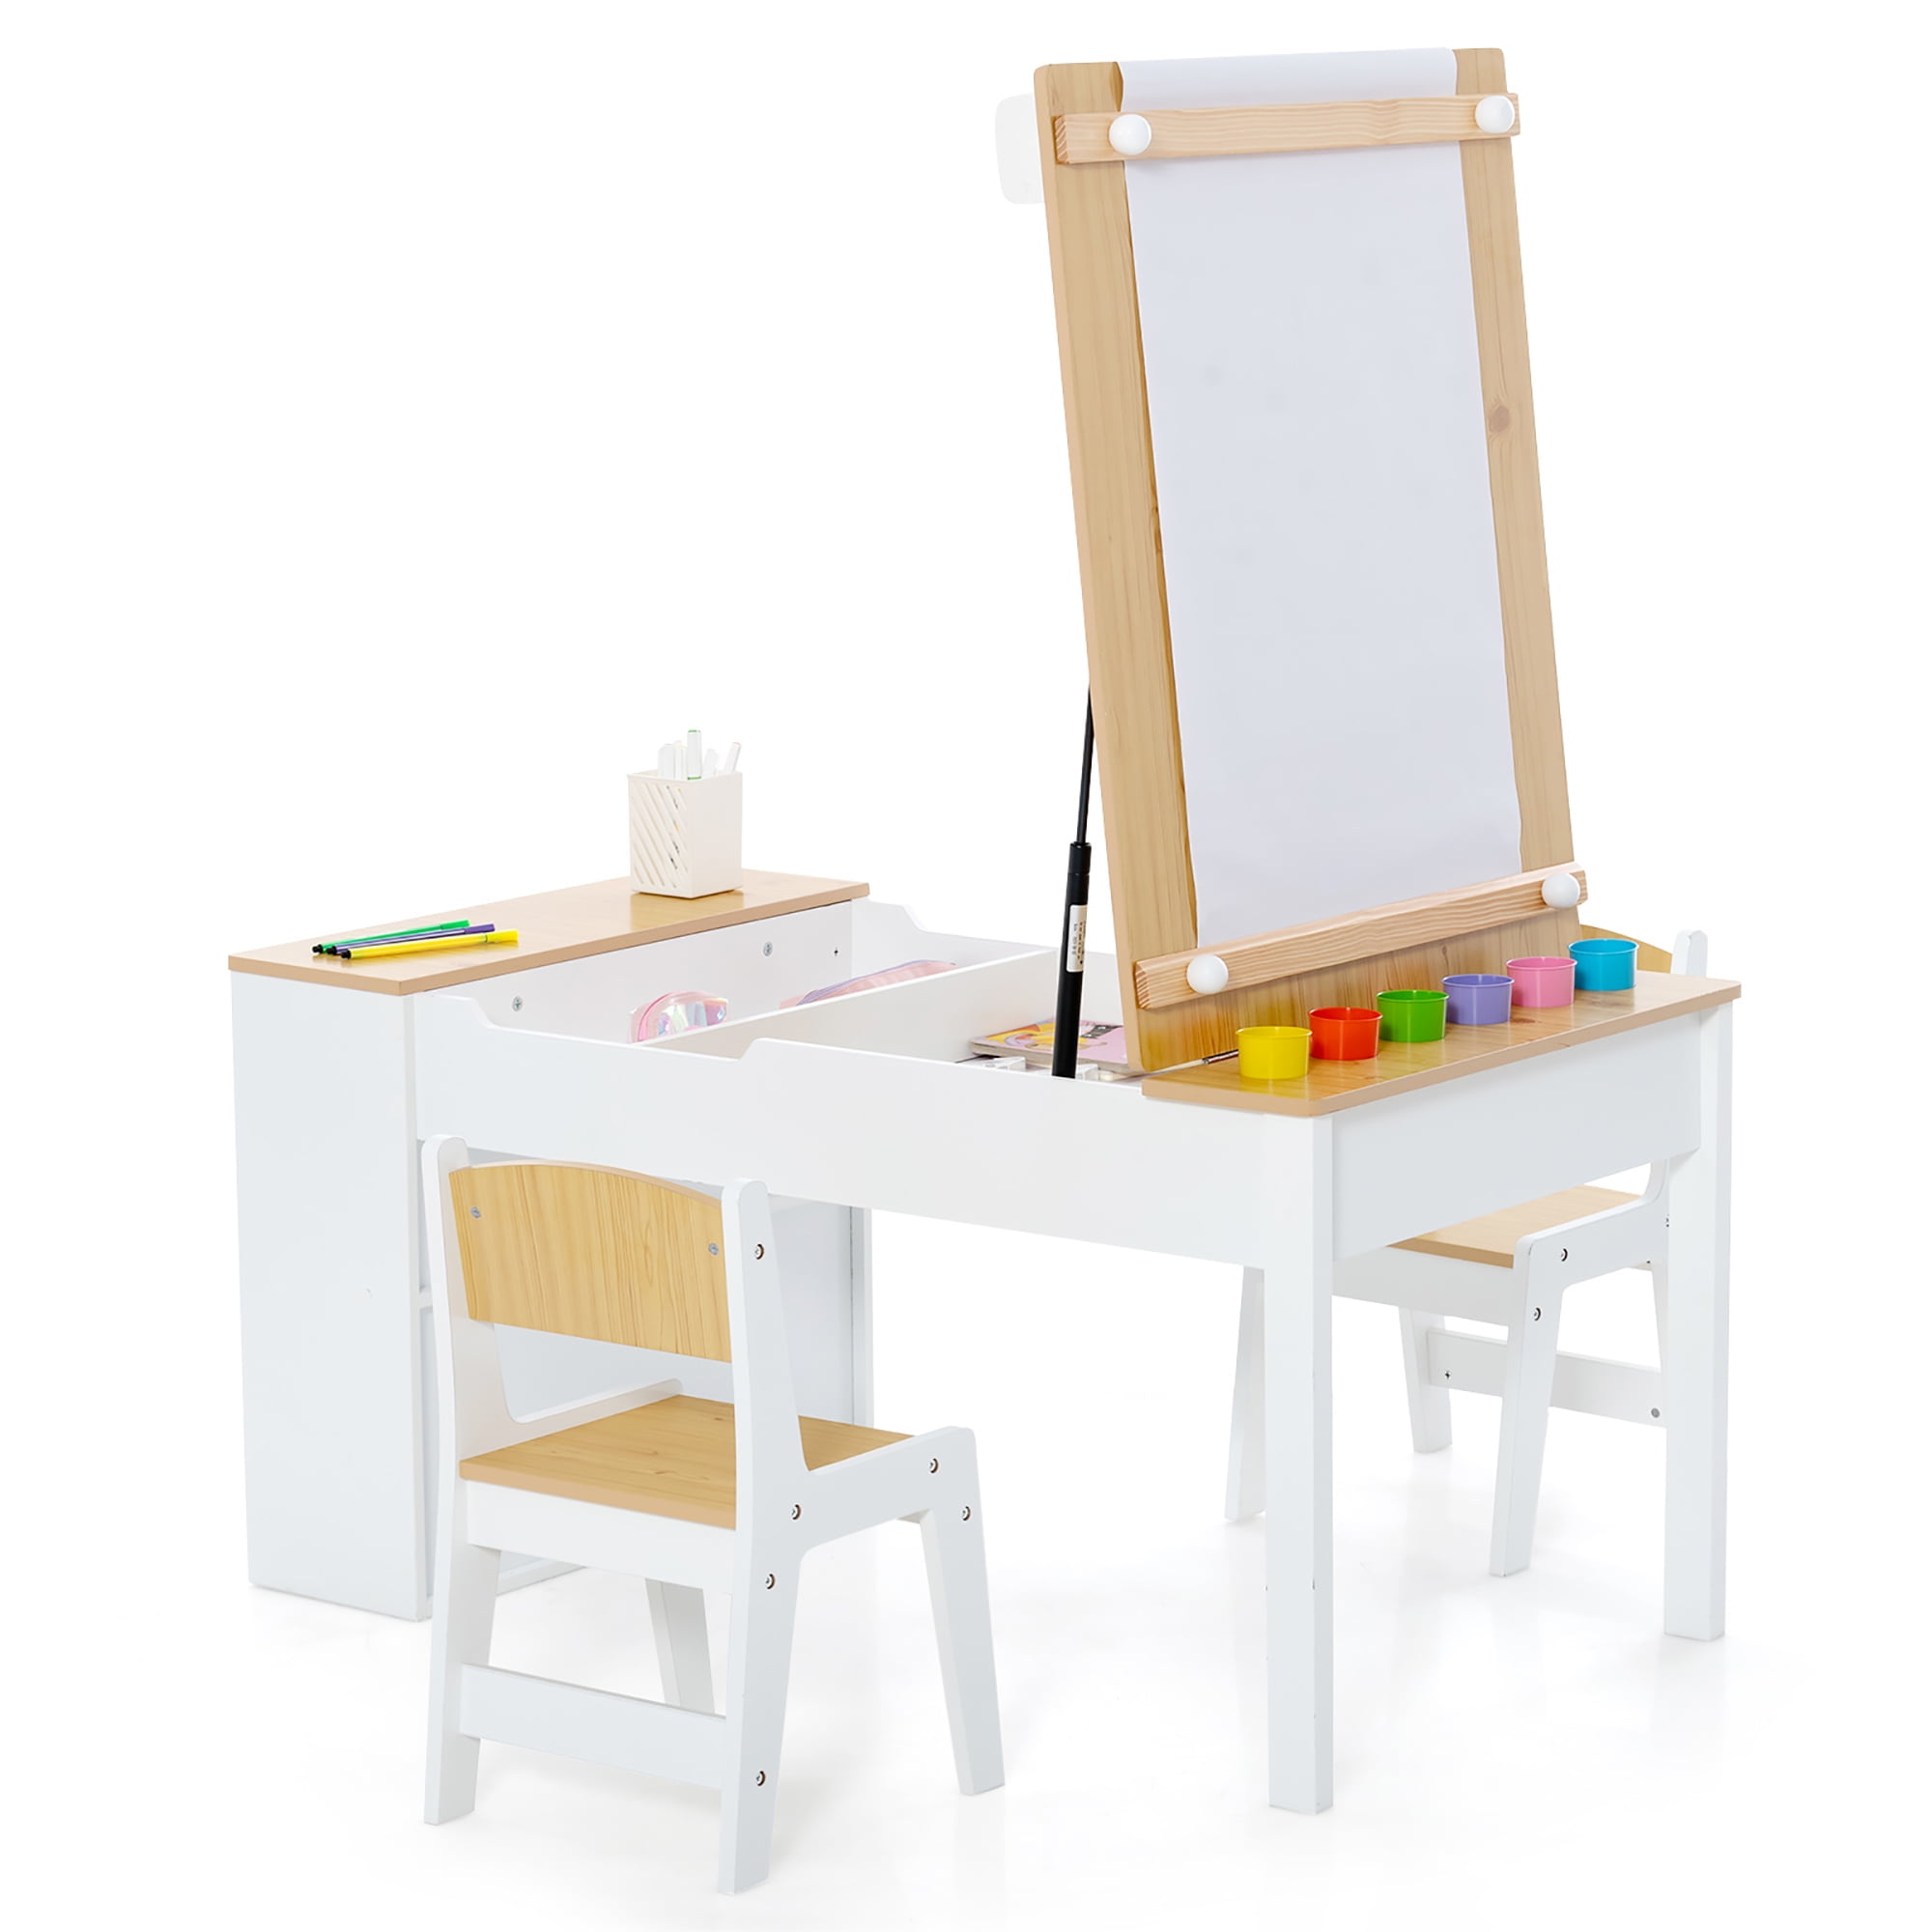 Drawing Board, Table Easel, Tabletop Easel A2 Wood Desktop Painting,  Drawing Table, Sketching Board & Display Easel Table Easel ТМ-37 A2 -   Denmark